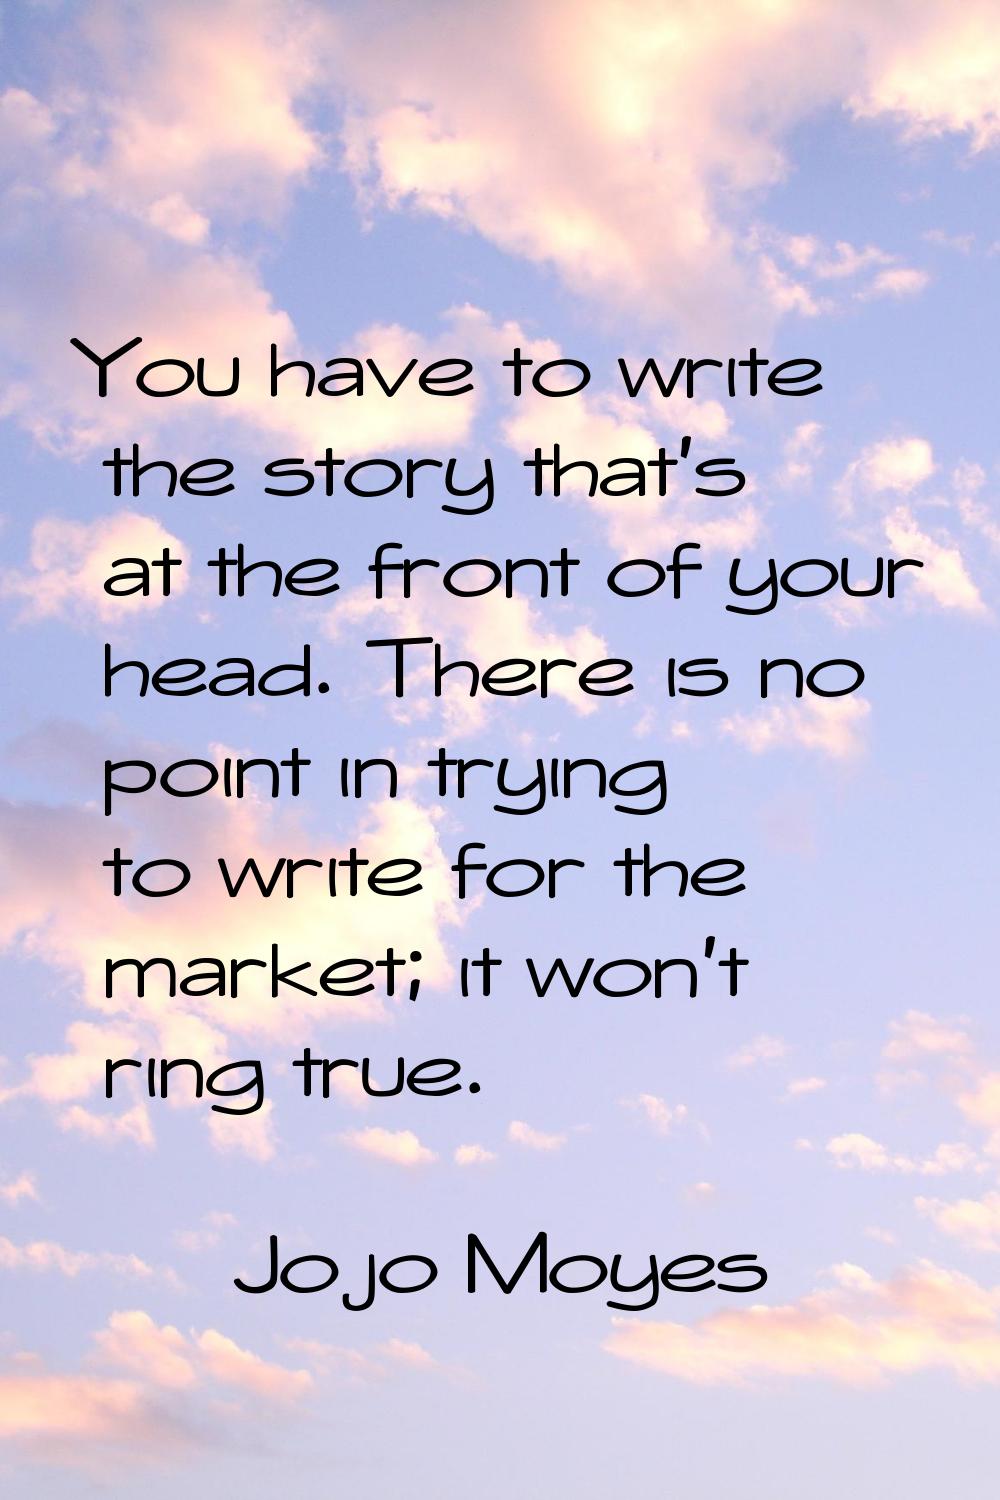 You have to write the story that's at the front of your head. There is no point in trying to write 